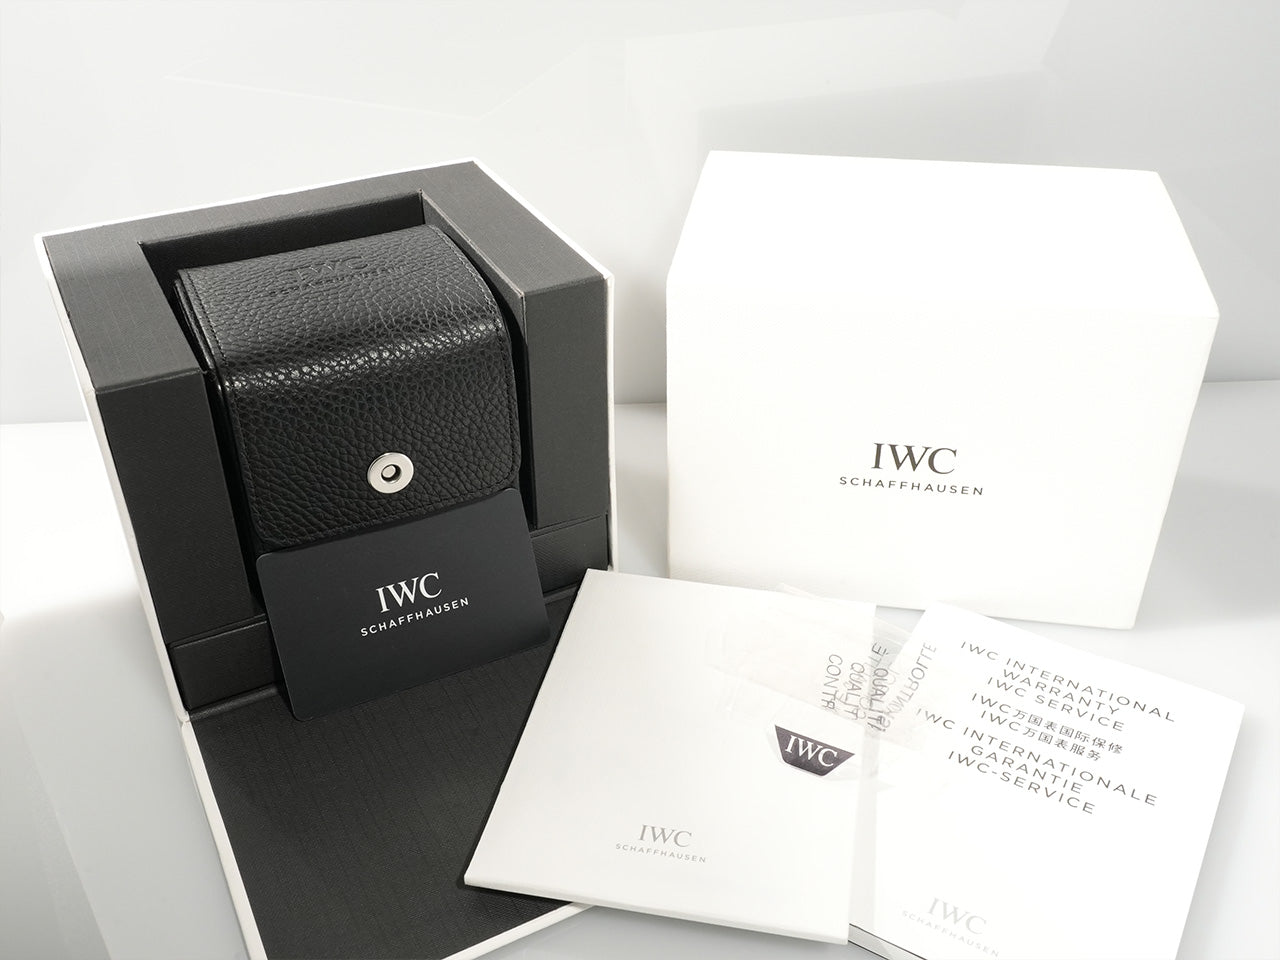 IWC Pilot's Watch Chronograph Ref.IW371813 SS Black Dial